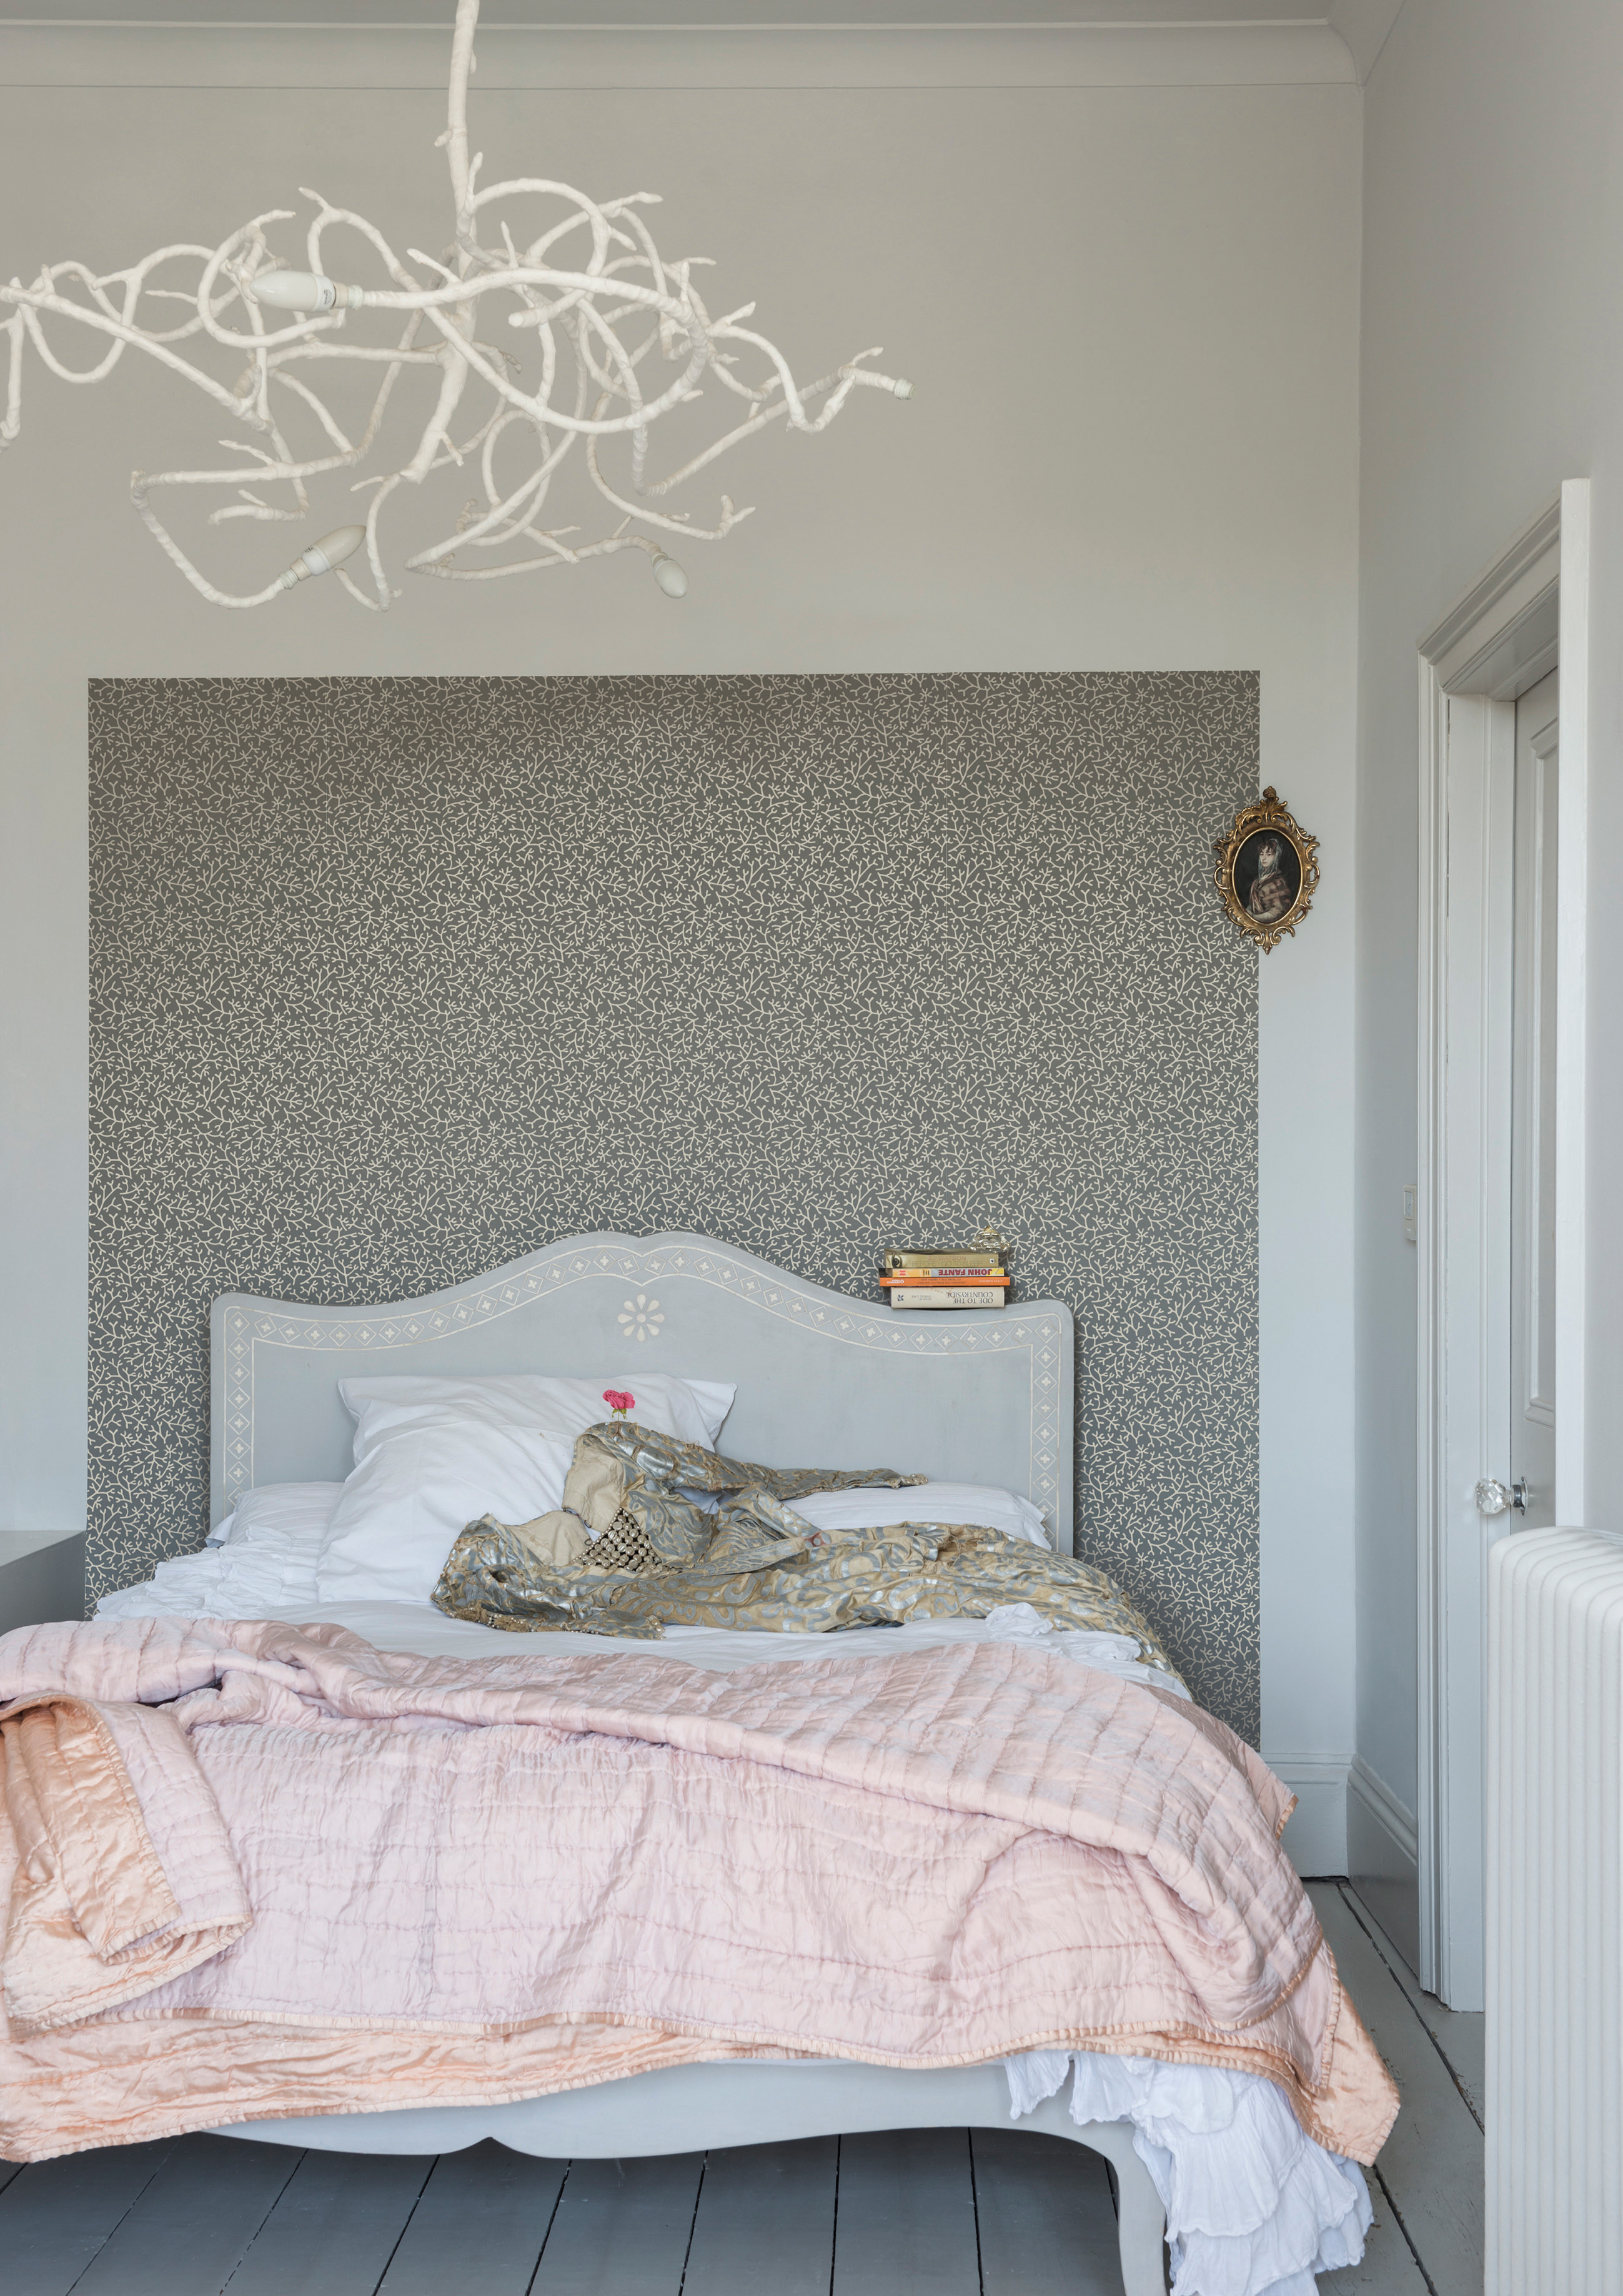 Farrow and Ball Samphire wallpaper defines romantic bed with headboard and pink and white linen plus pendant lighting